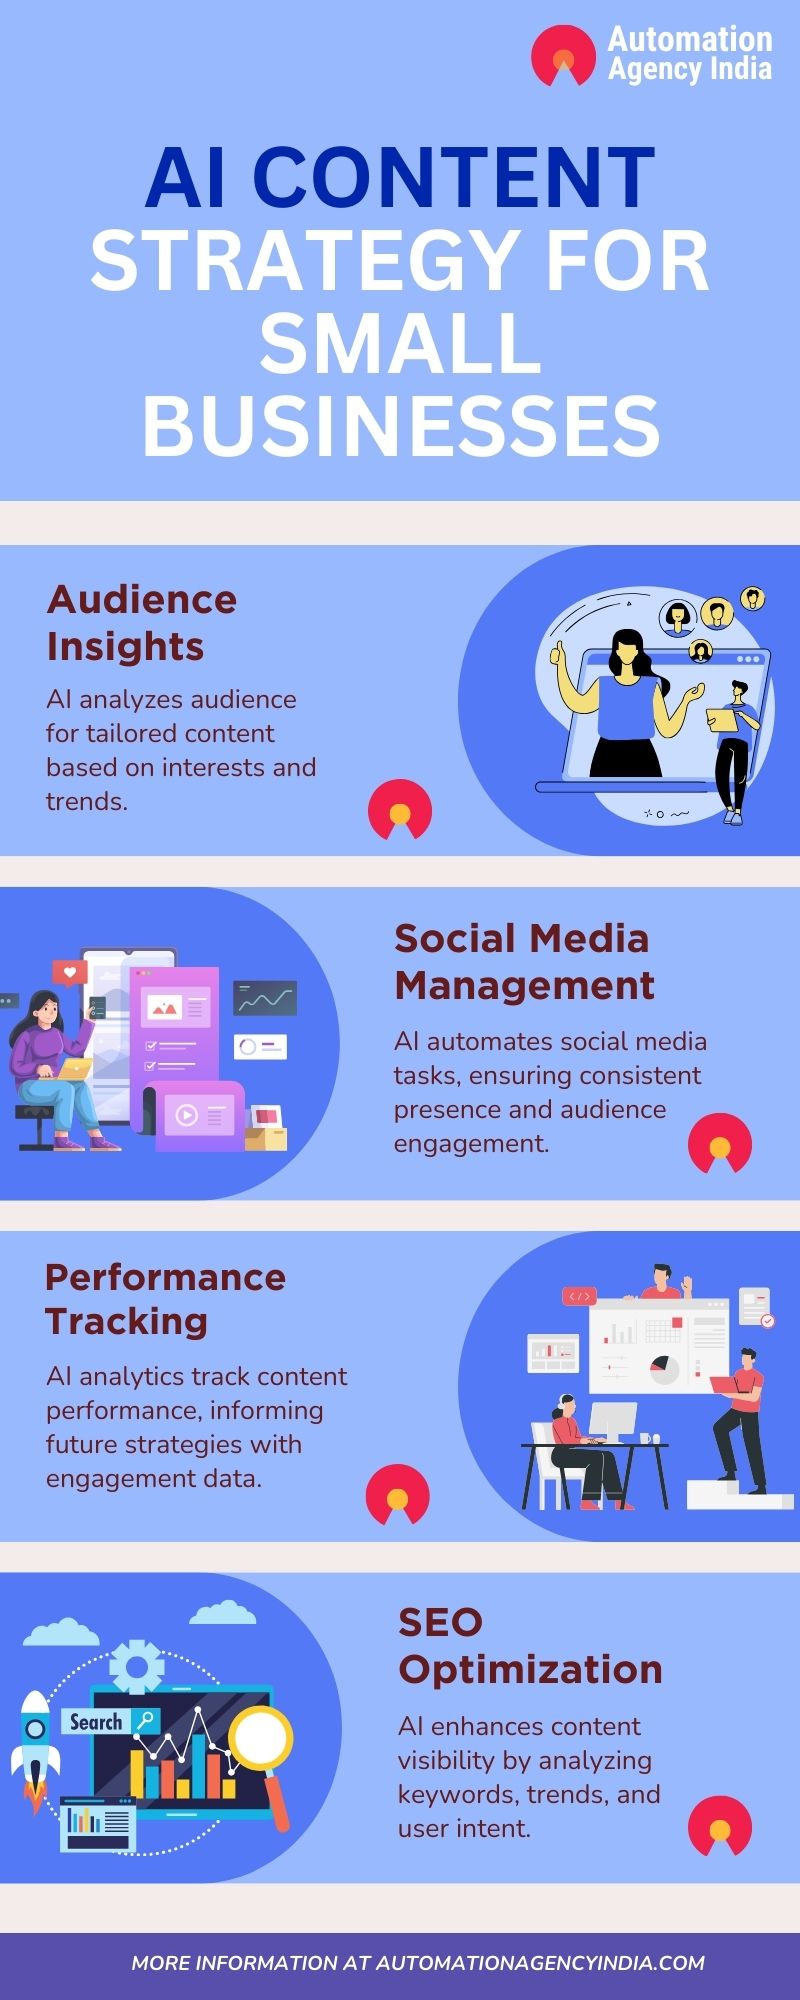 Infographic on AI Content Strategy for Small Businesses